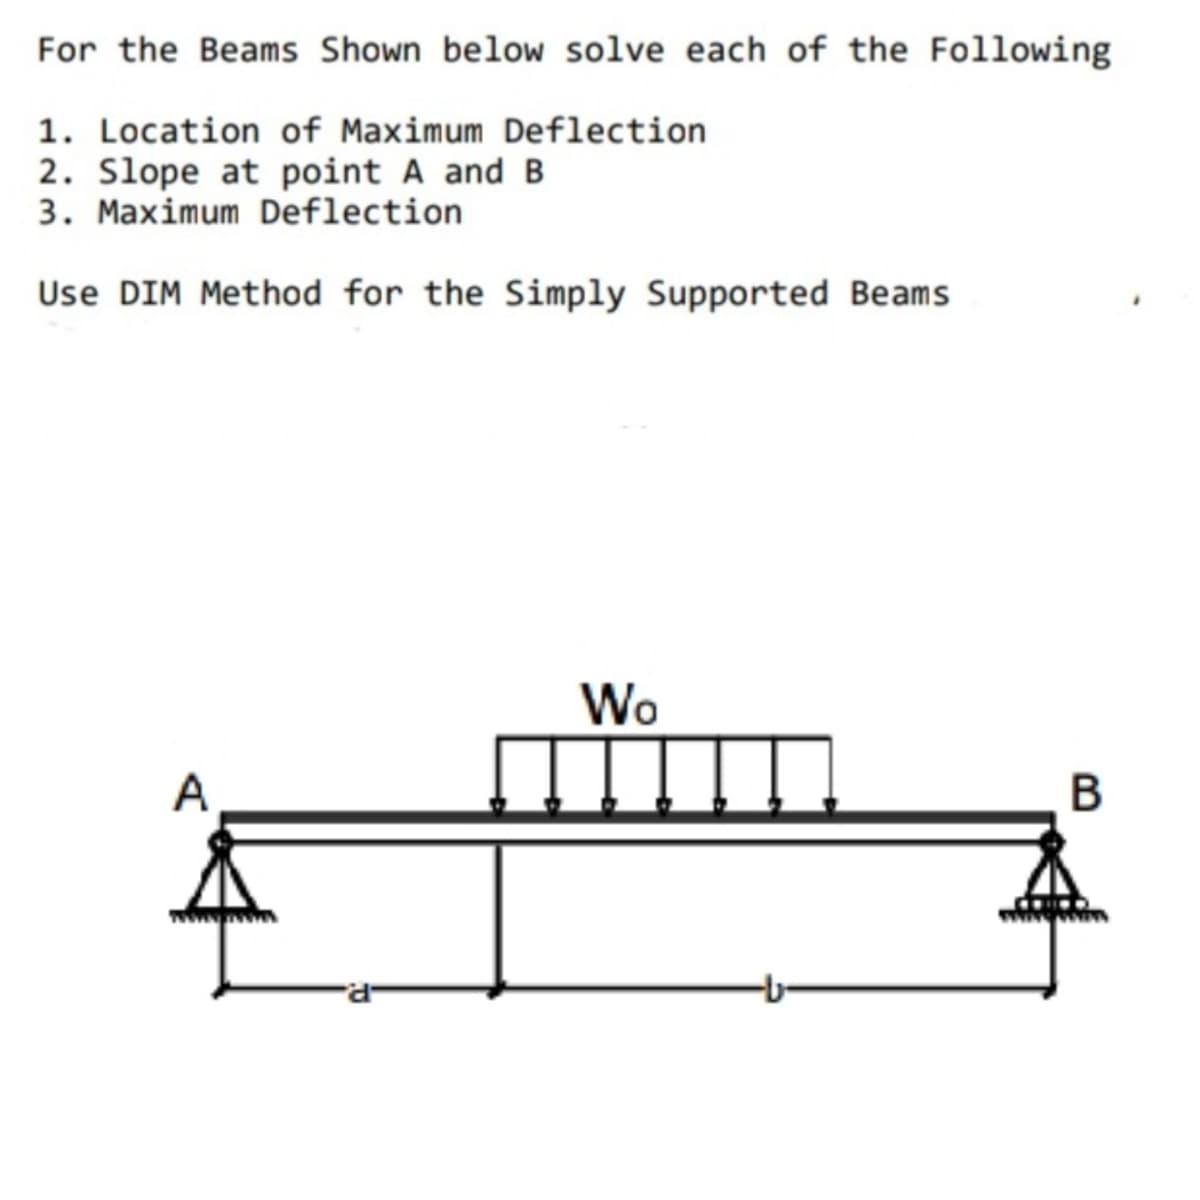 For the Beams Shown below solve each of the Following
1. Location of Maximum Deflection
2. Slope at point A and B
3. Maximum Deflection
Use DIM Method for the Simply Supported Beams
A
Wo
B